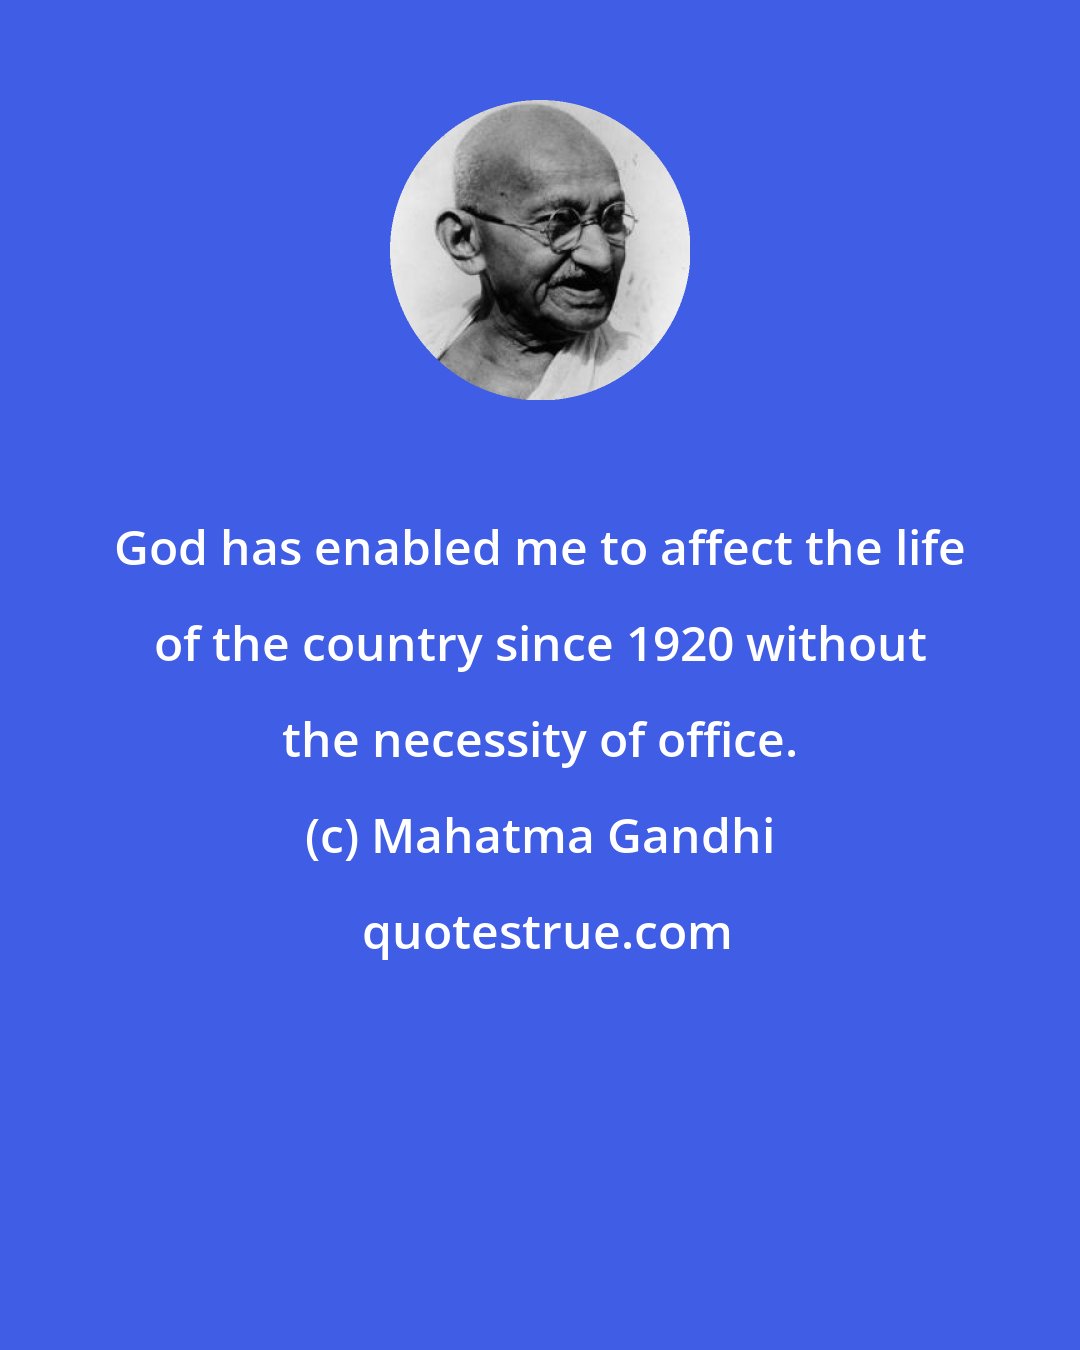 Mahatma Gandhi: God has enabled me to affect the life of the country since 1920 without the necessity of office.